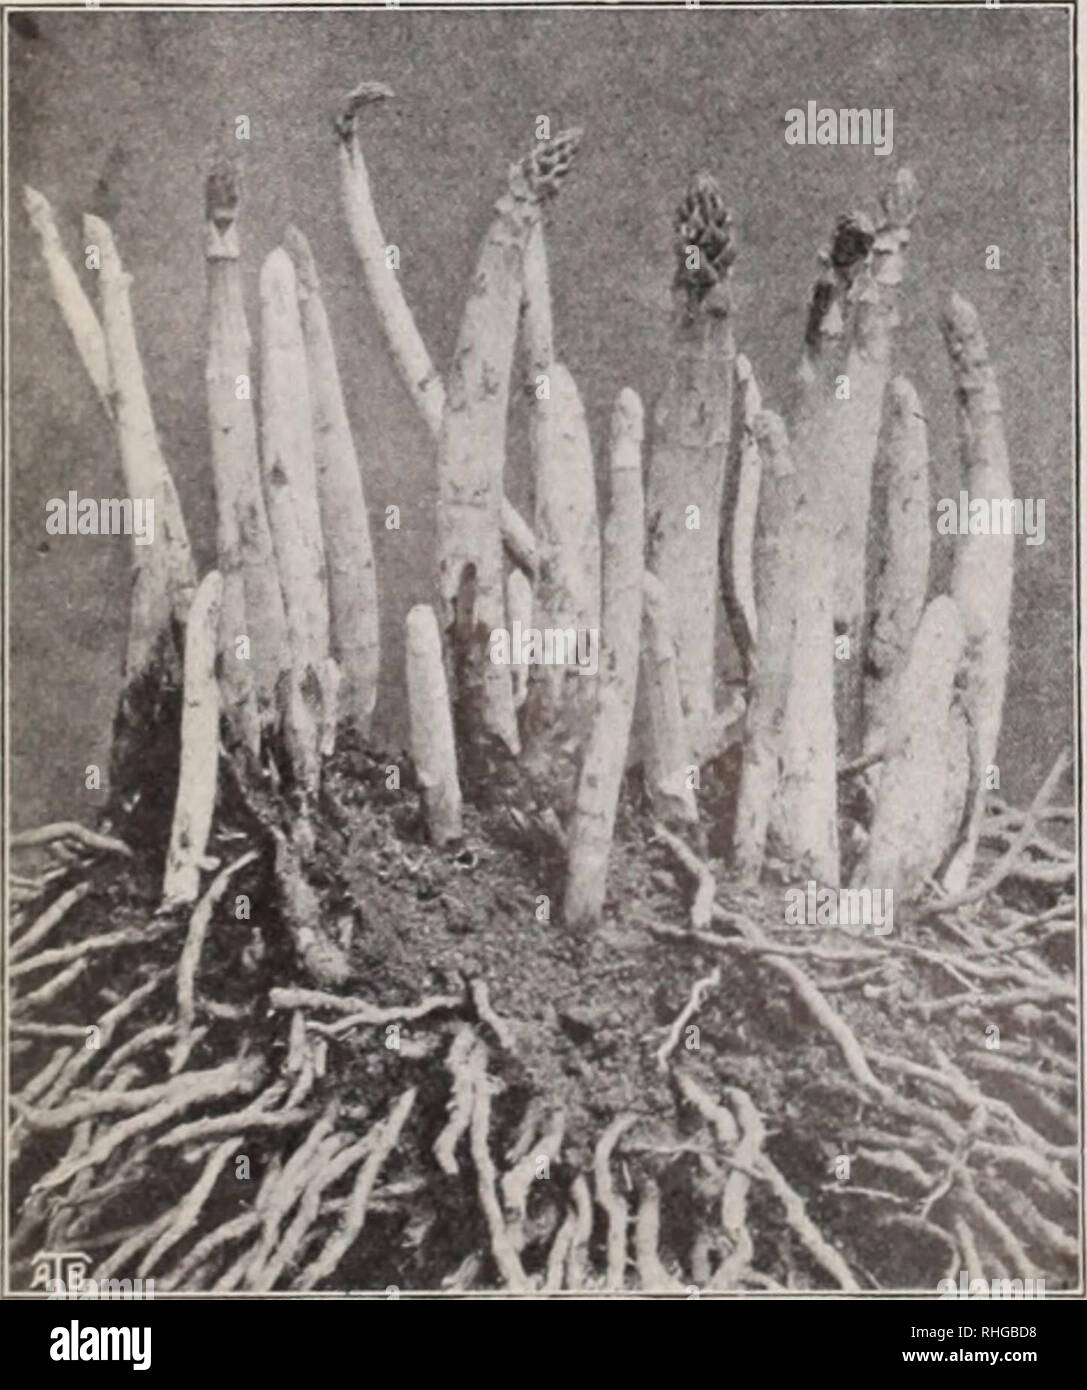 . Boddington's quality bulbs, seeds and plants / Arthur T. Boddington.. Nursery Catalogue. 4(1 Arthur T. Boddinpton, 342 West 14th St.. New York City GRASSES AND CLOVERS Pricea subject to change without notice Creeping Bent (Agrros'is stolonifcra). The distinctive feature of this species is, as the name implies, its compact, creeping, rooting stems. It is of rapid growth and spreading habit, and the stolonif- erous roots form a strong, enduring turf, tlial is positively im- proved by constant tramping. Heing of fhie te.tiire, it is most valual)le for lawns and putting greins. If sown alone, 5 Stock Photo